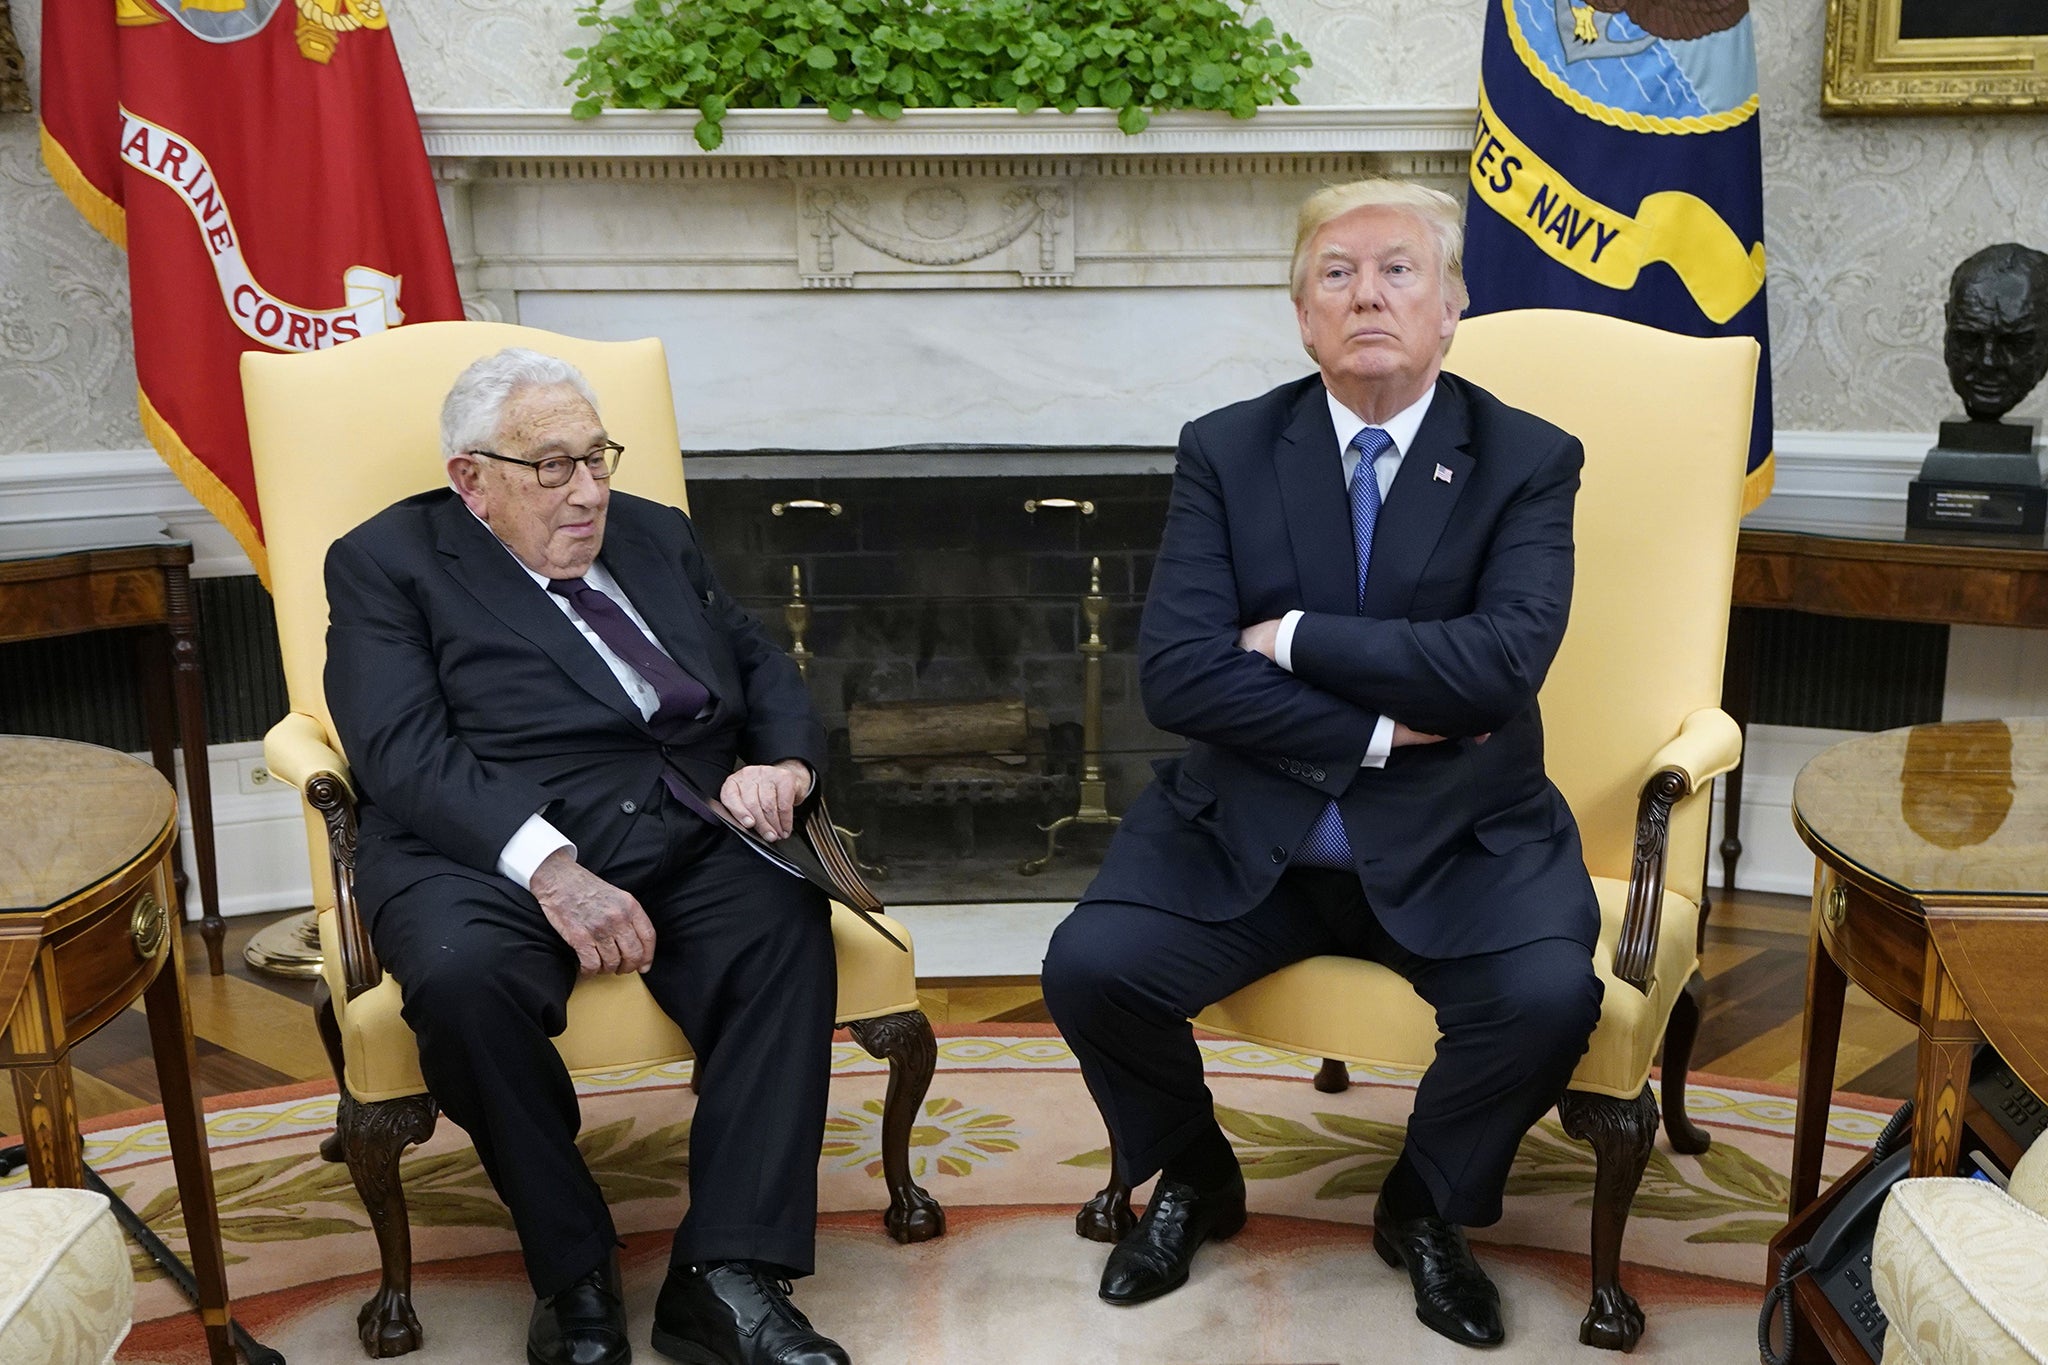 US President Donald Trump meets with Kissinger in the Oval Office in 2017